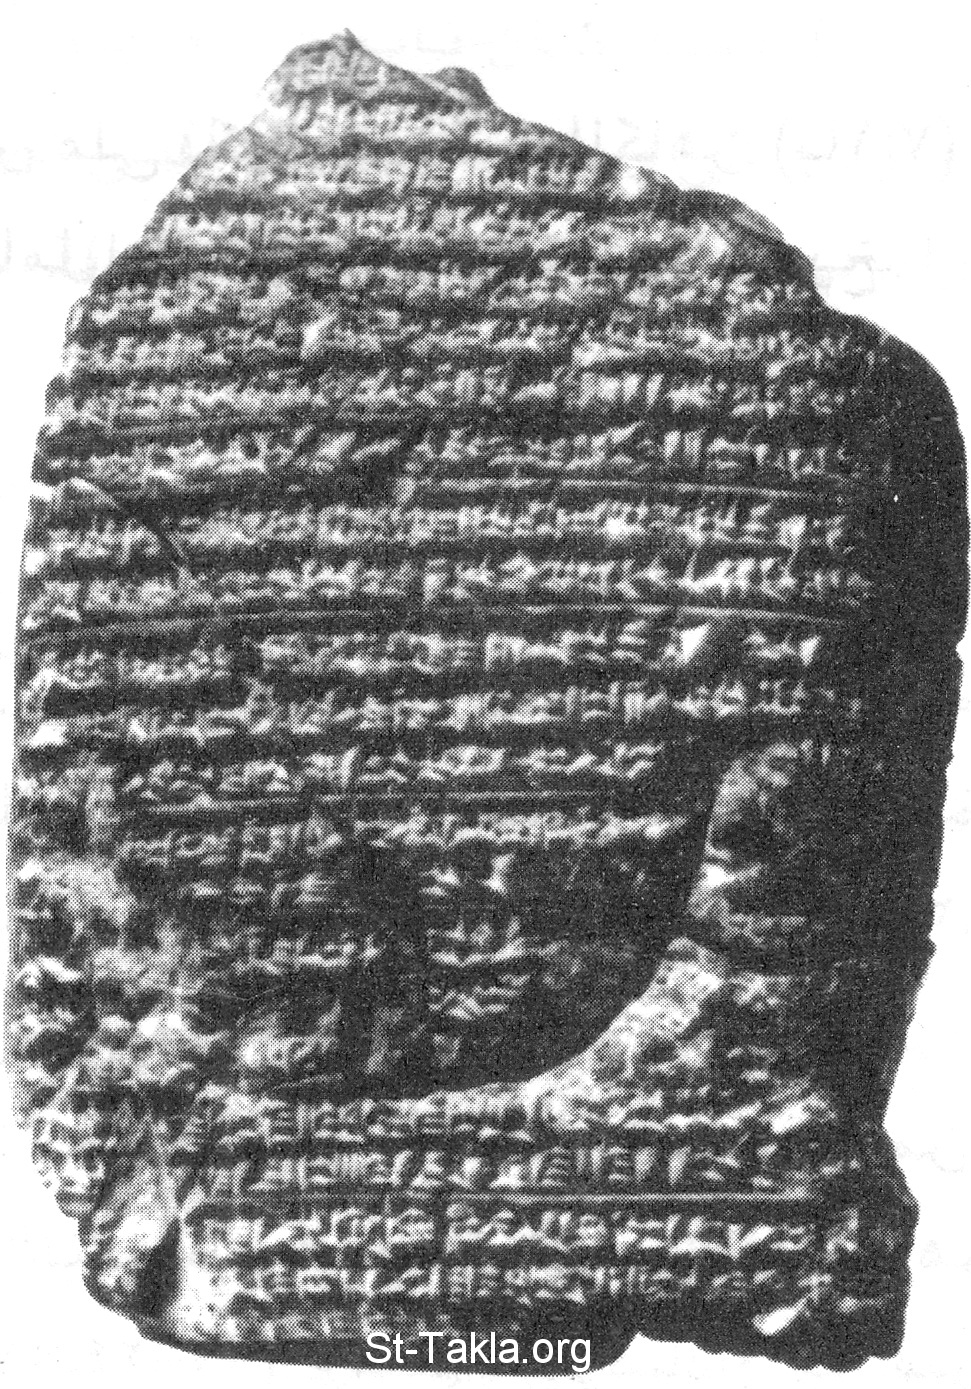 St-Takla.org Image: An ancient stone that has part of the History of Nebuchadnezzar II, and note that his name is written as "Nabkudurriuṣur" instead of Nebuchadnezzr (see Jer. 21:2). And written on it that Jehoiakim was dethroned, and his uncle Mattaniah was made king instead of him, and he changed his name to Zedekiah. And written also about the destruction of Jerusalem regarding the mutiny of Zedekiah (586 A. D.). This stone goes back to (605-562 A. D.).     :                    - (  21: 2).                .         586 . .       605-562 . .